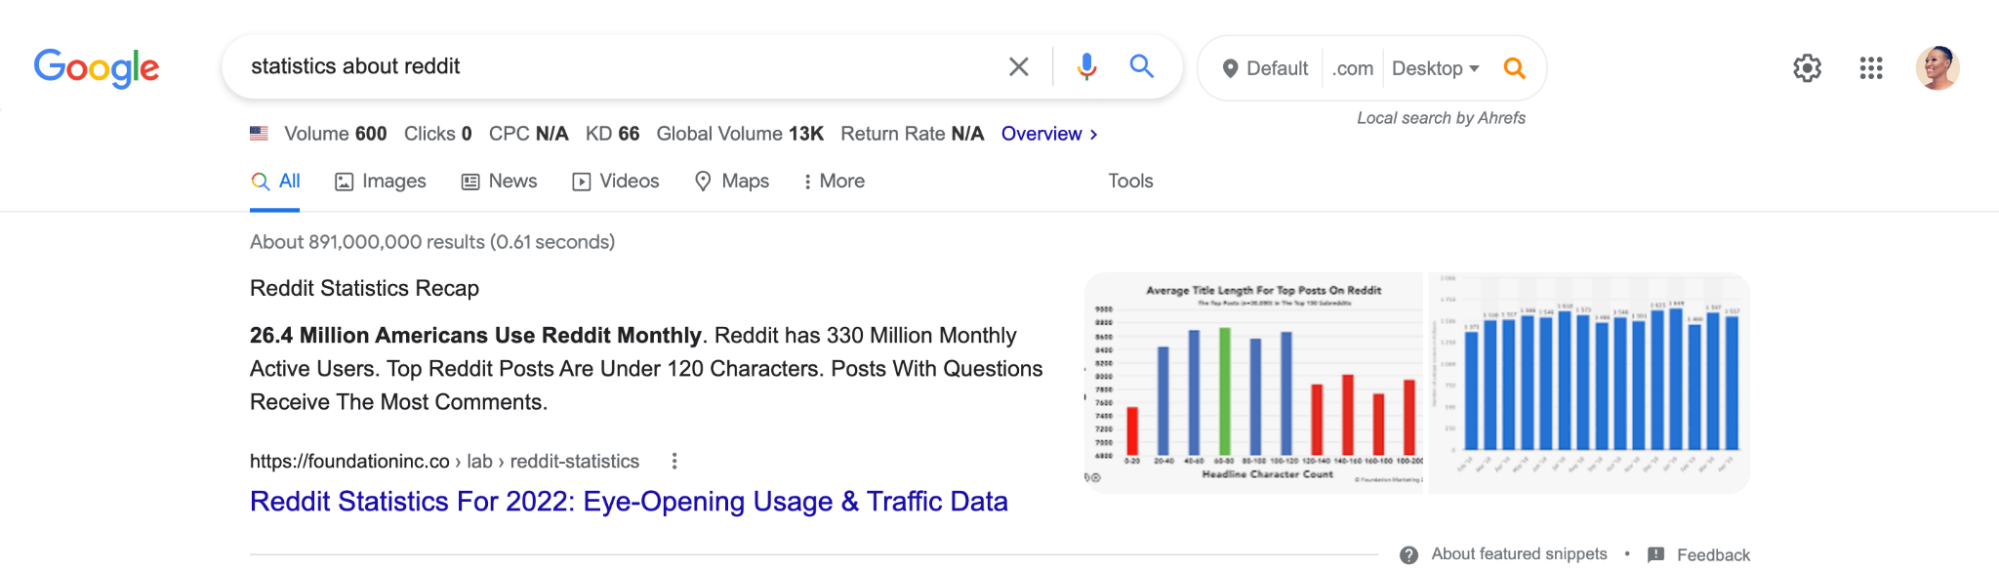 search engine results page for statistics about Reddit